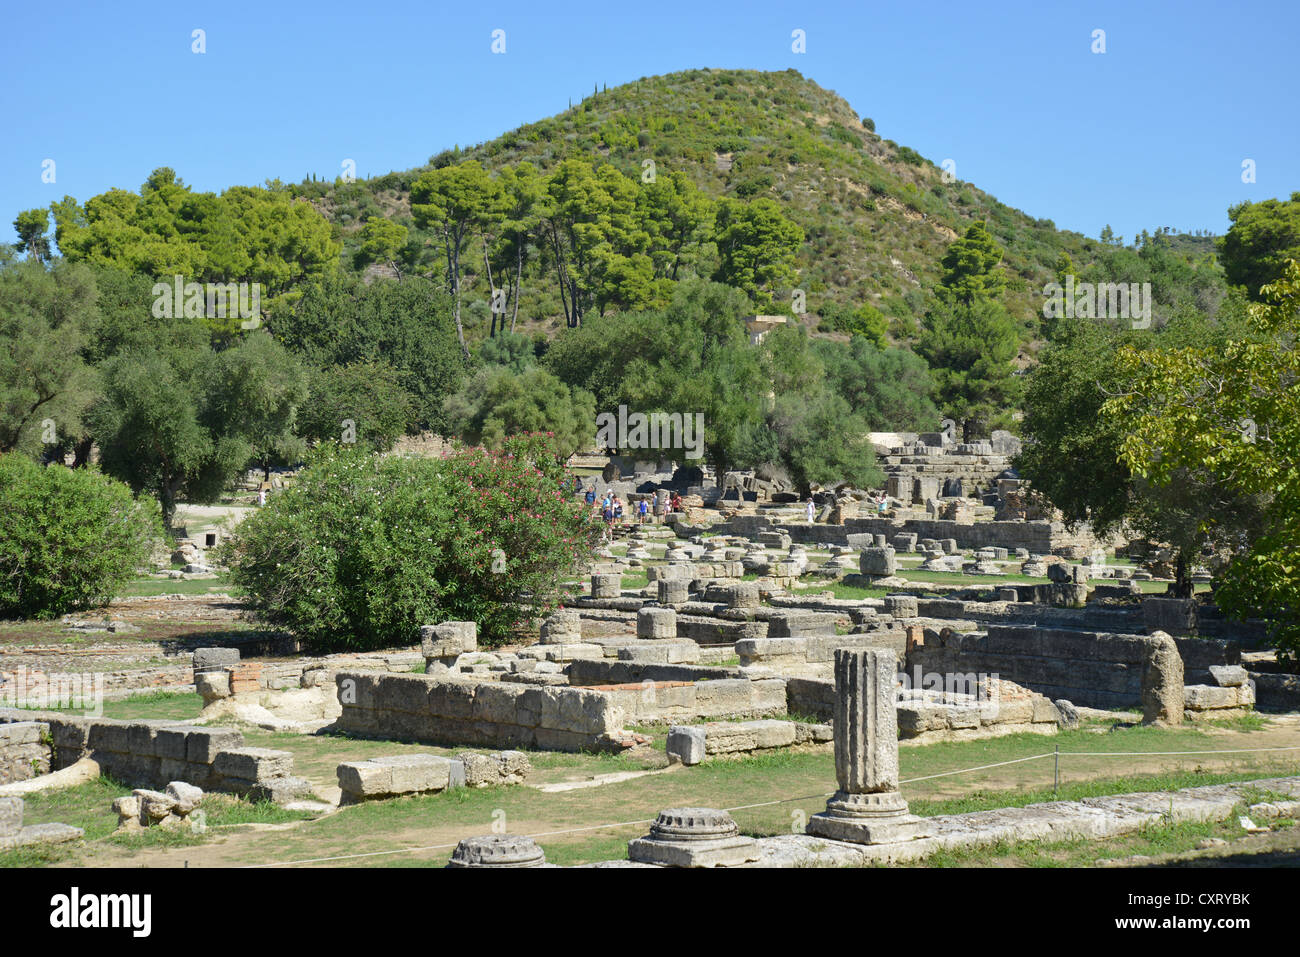 View of ruins and Mount Kronos at ancient Olympia, Elis, West Greece